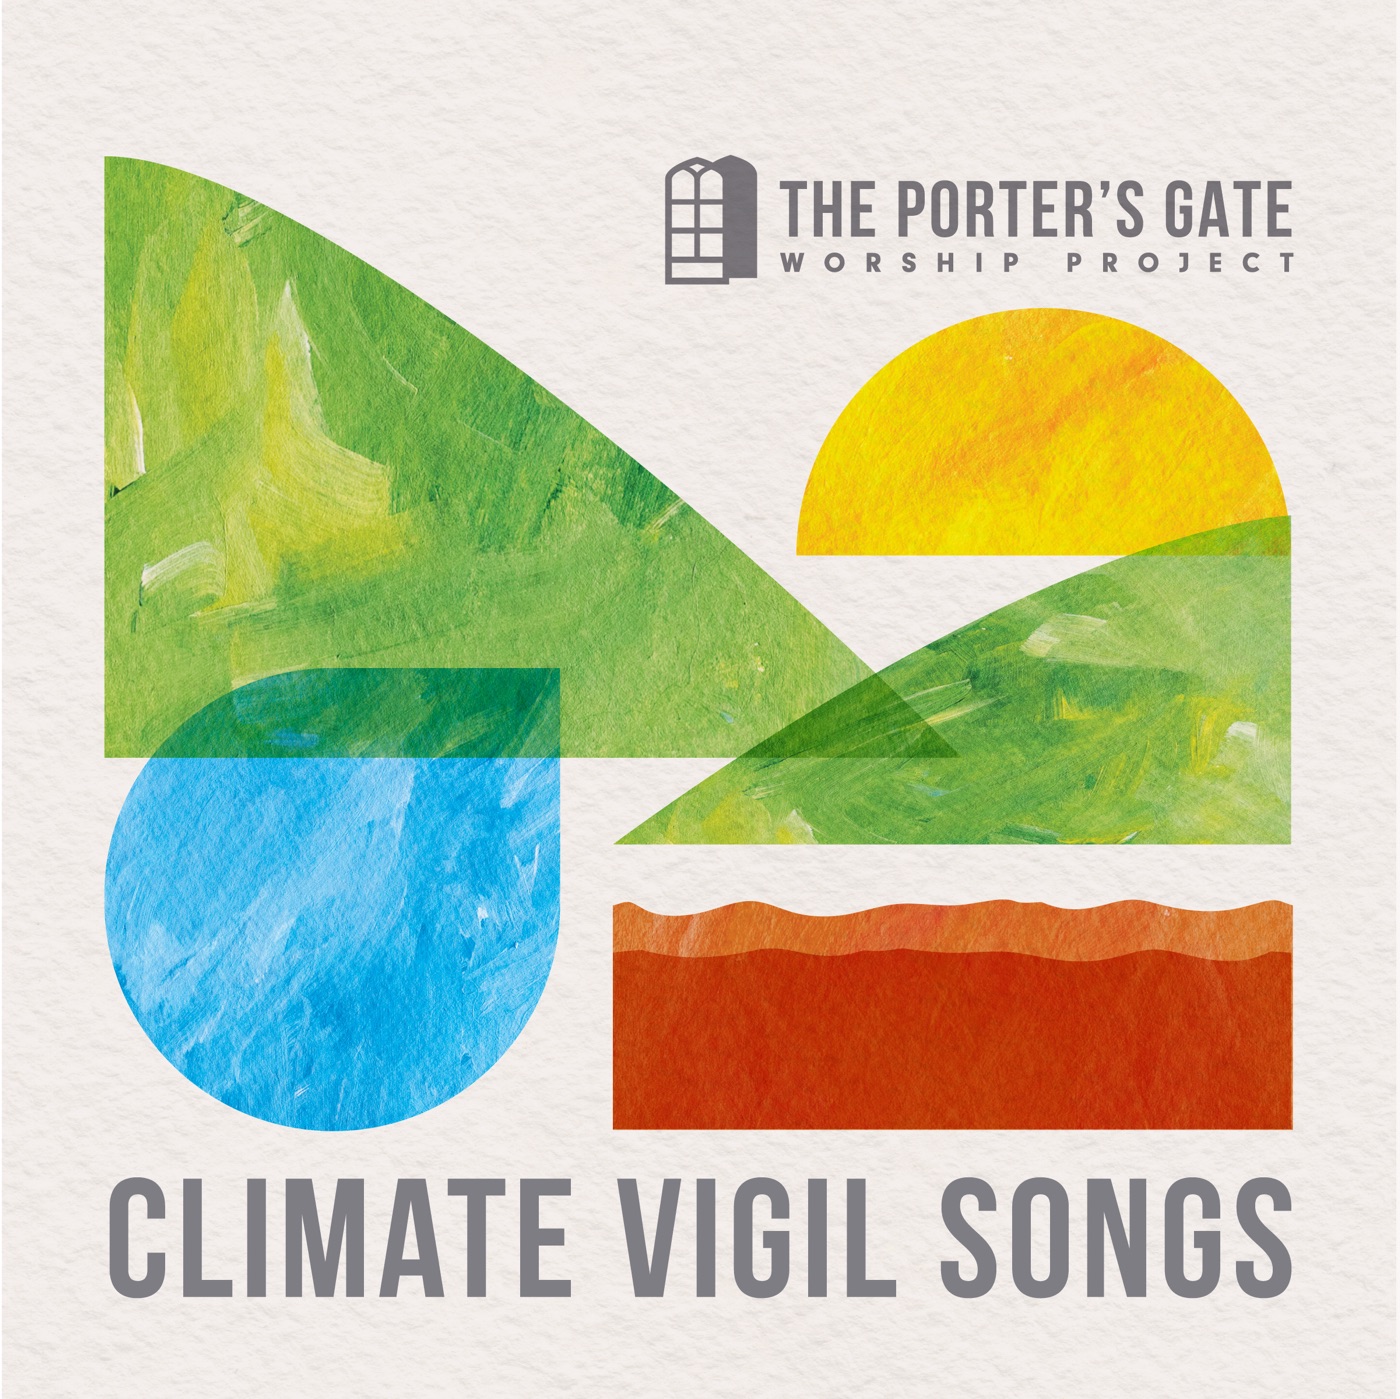 Climate Vigil Songs by The Porter's Gate